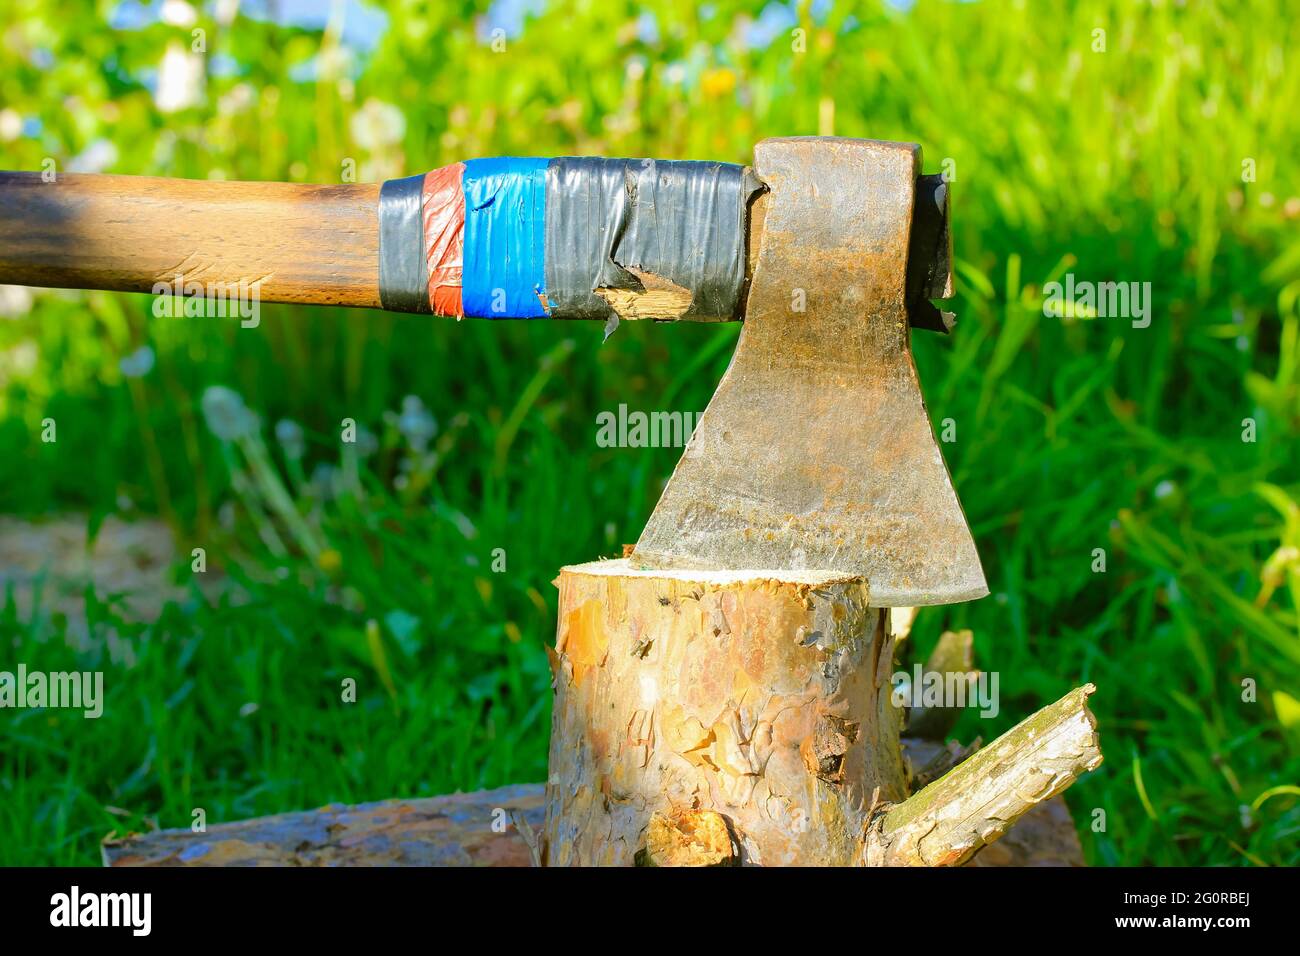 Chopping wood with an old metal axe or hatchet with a wooden handle in  nature. Stump of pine tree on green grass. in summer day. Rural life, a  househo Stock Photo -